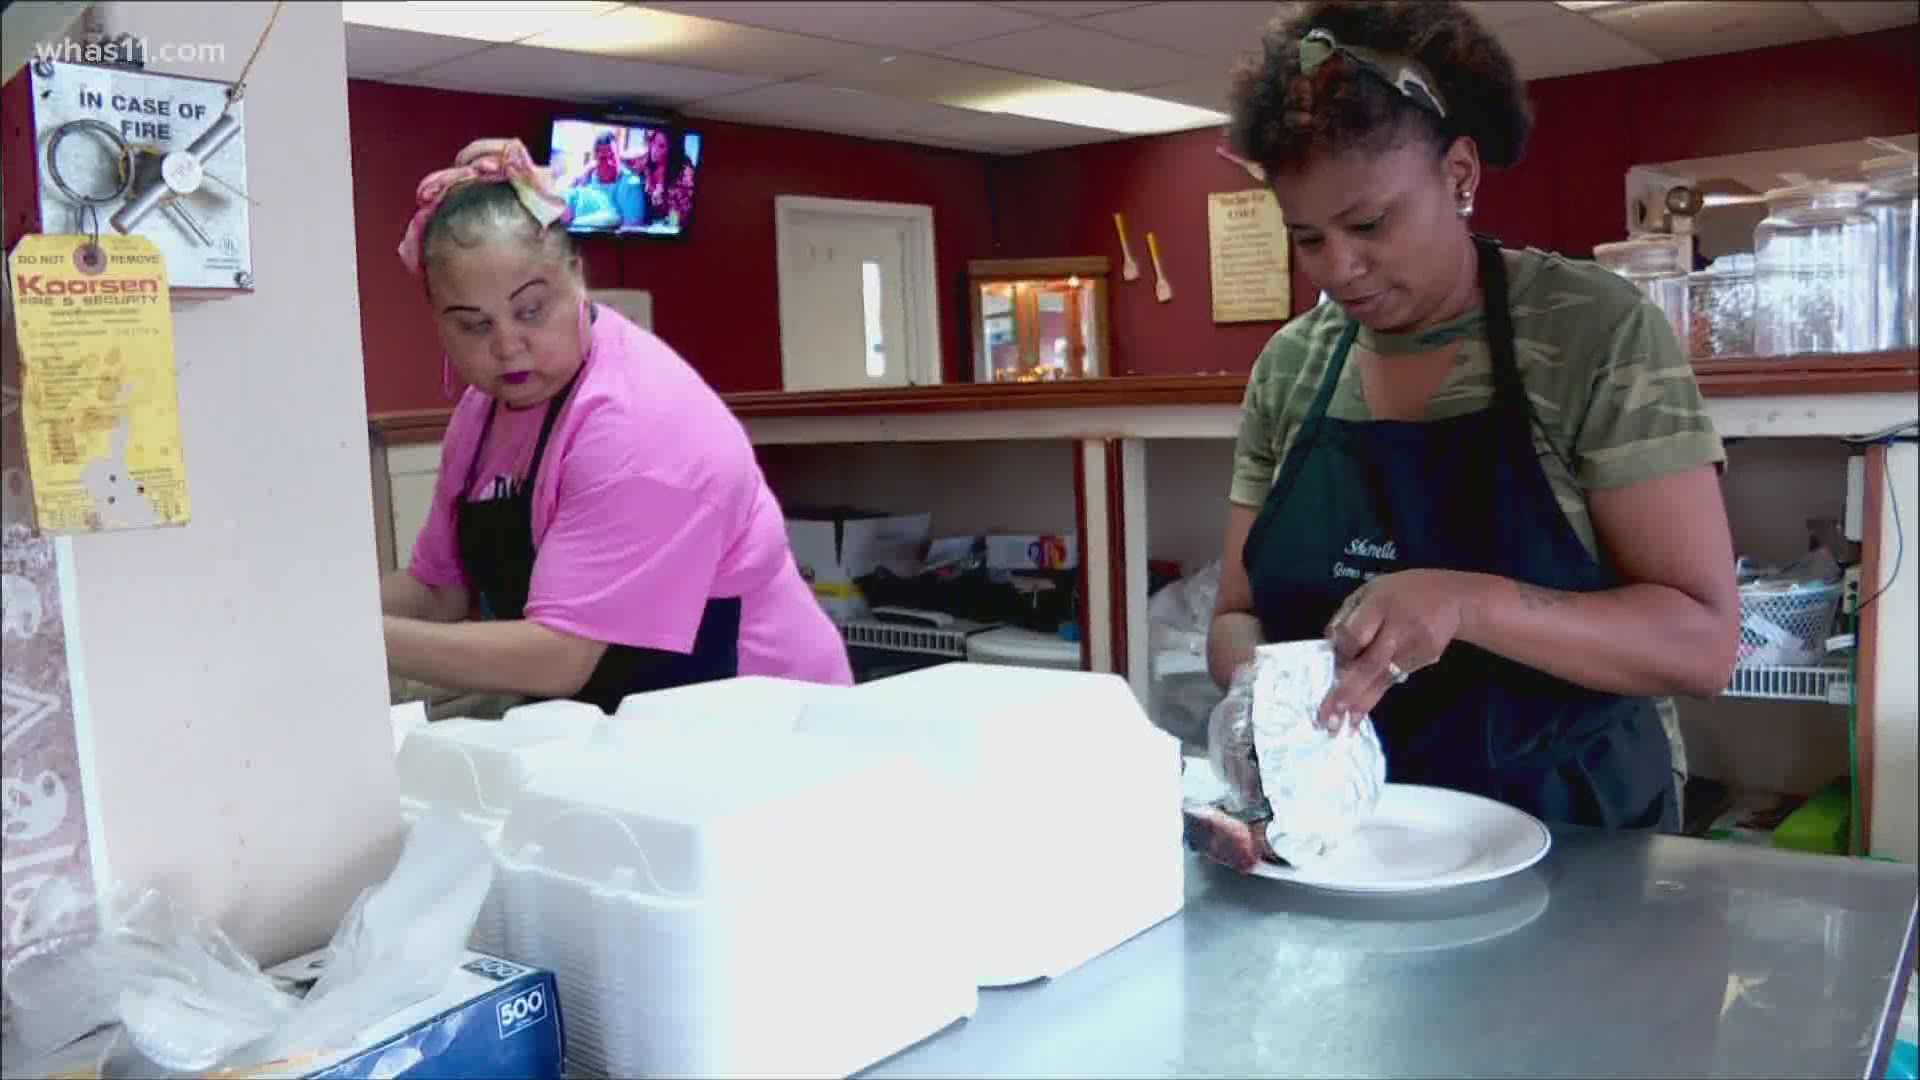 502 Black Eats Week is a new week-long program coming up in October is seeking to highlight Black-owned restaurants and food businesses in Louisville.